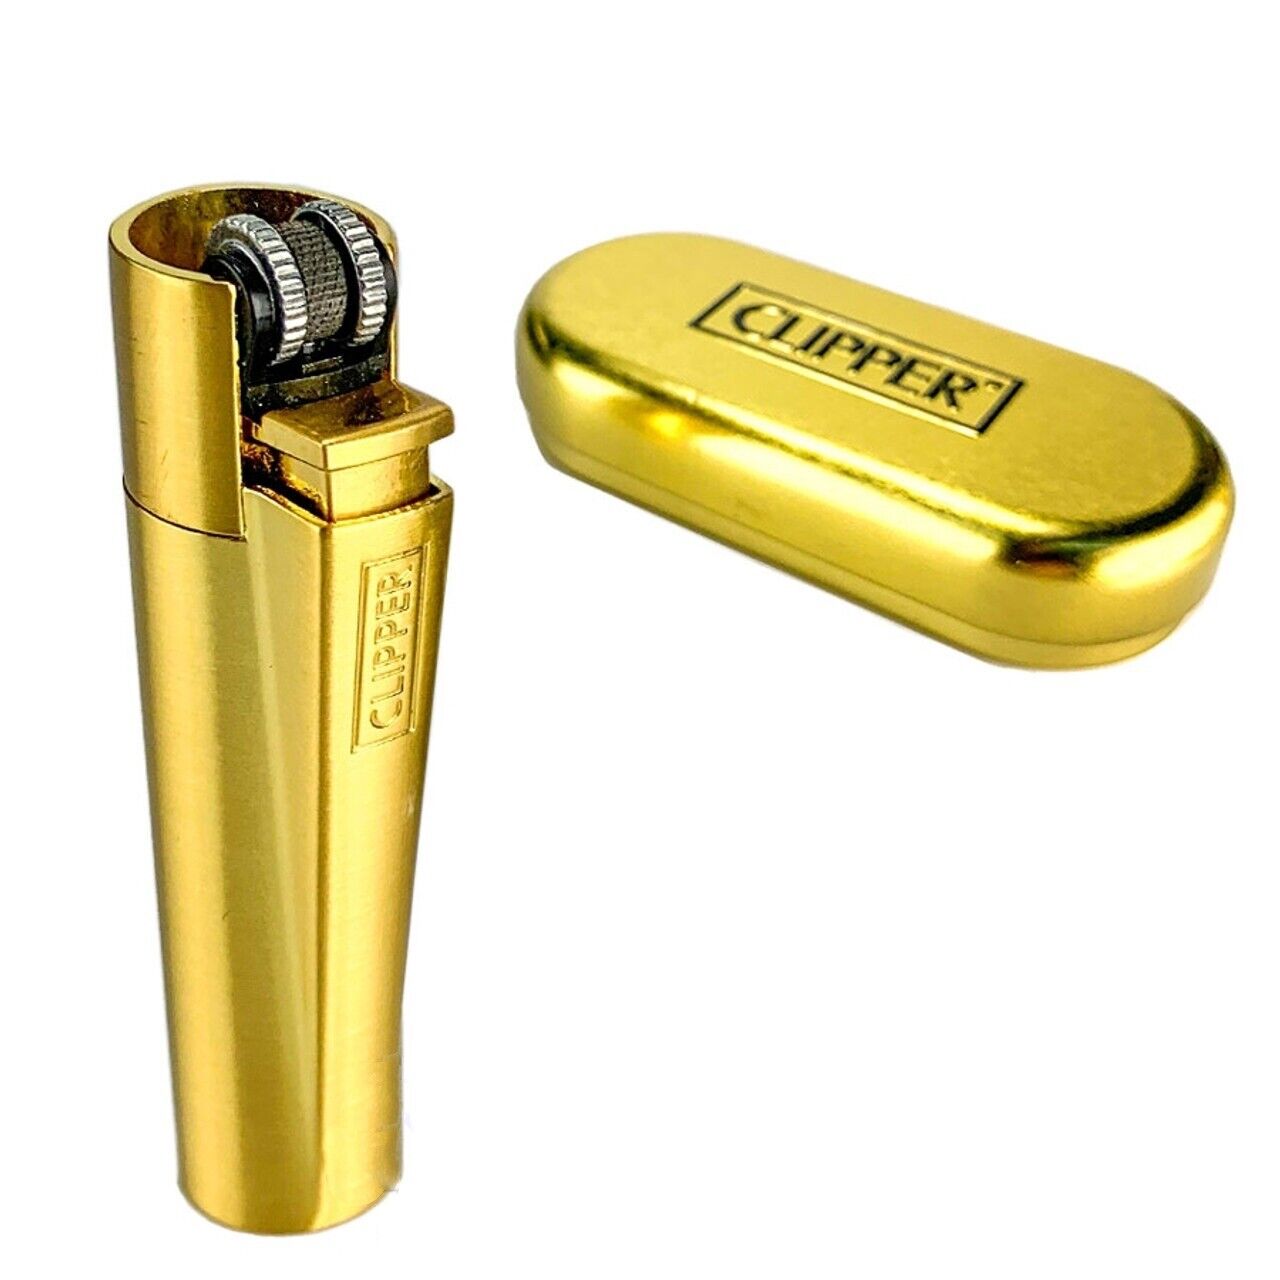 1 x Full Size Refillable Metal Clipper Lighter Gold with Lighter Box Tin